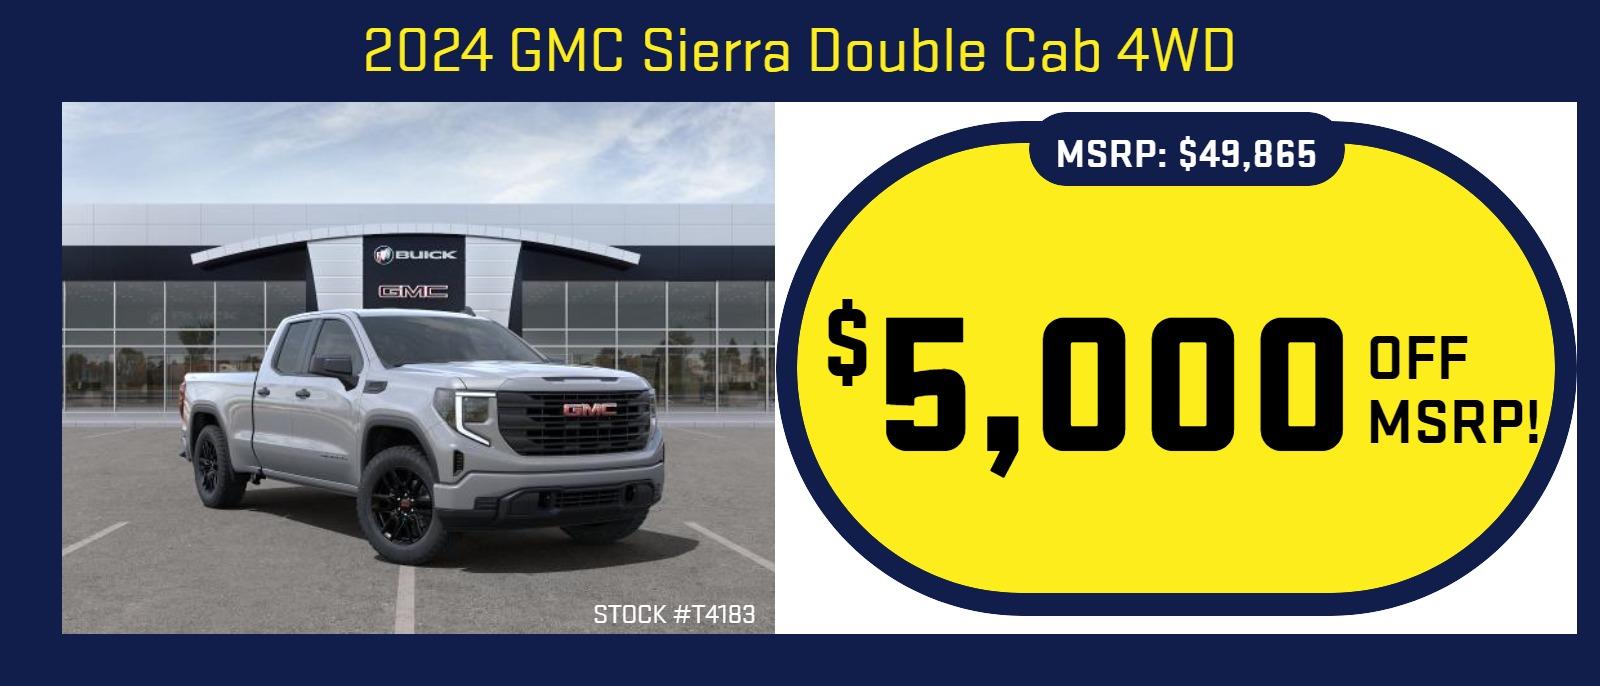 2023 GMC Sierra Double Cab 4WD Elevation 
Stock #T4183

MSRP: $49,865
$5,000 OFF MSRP!